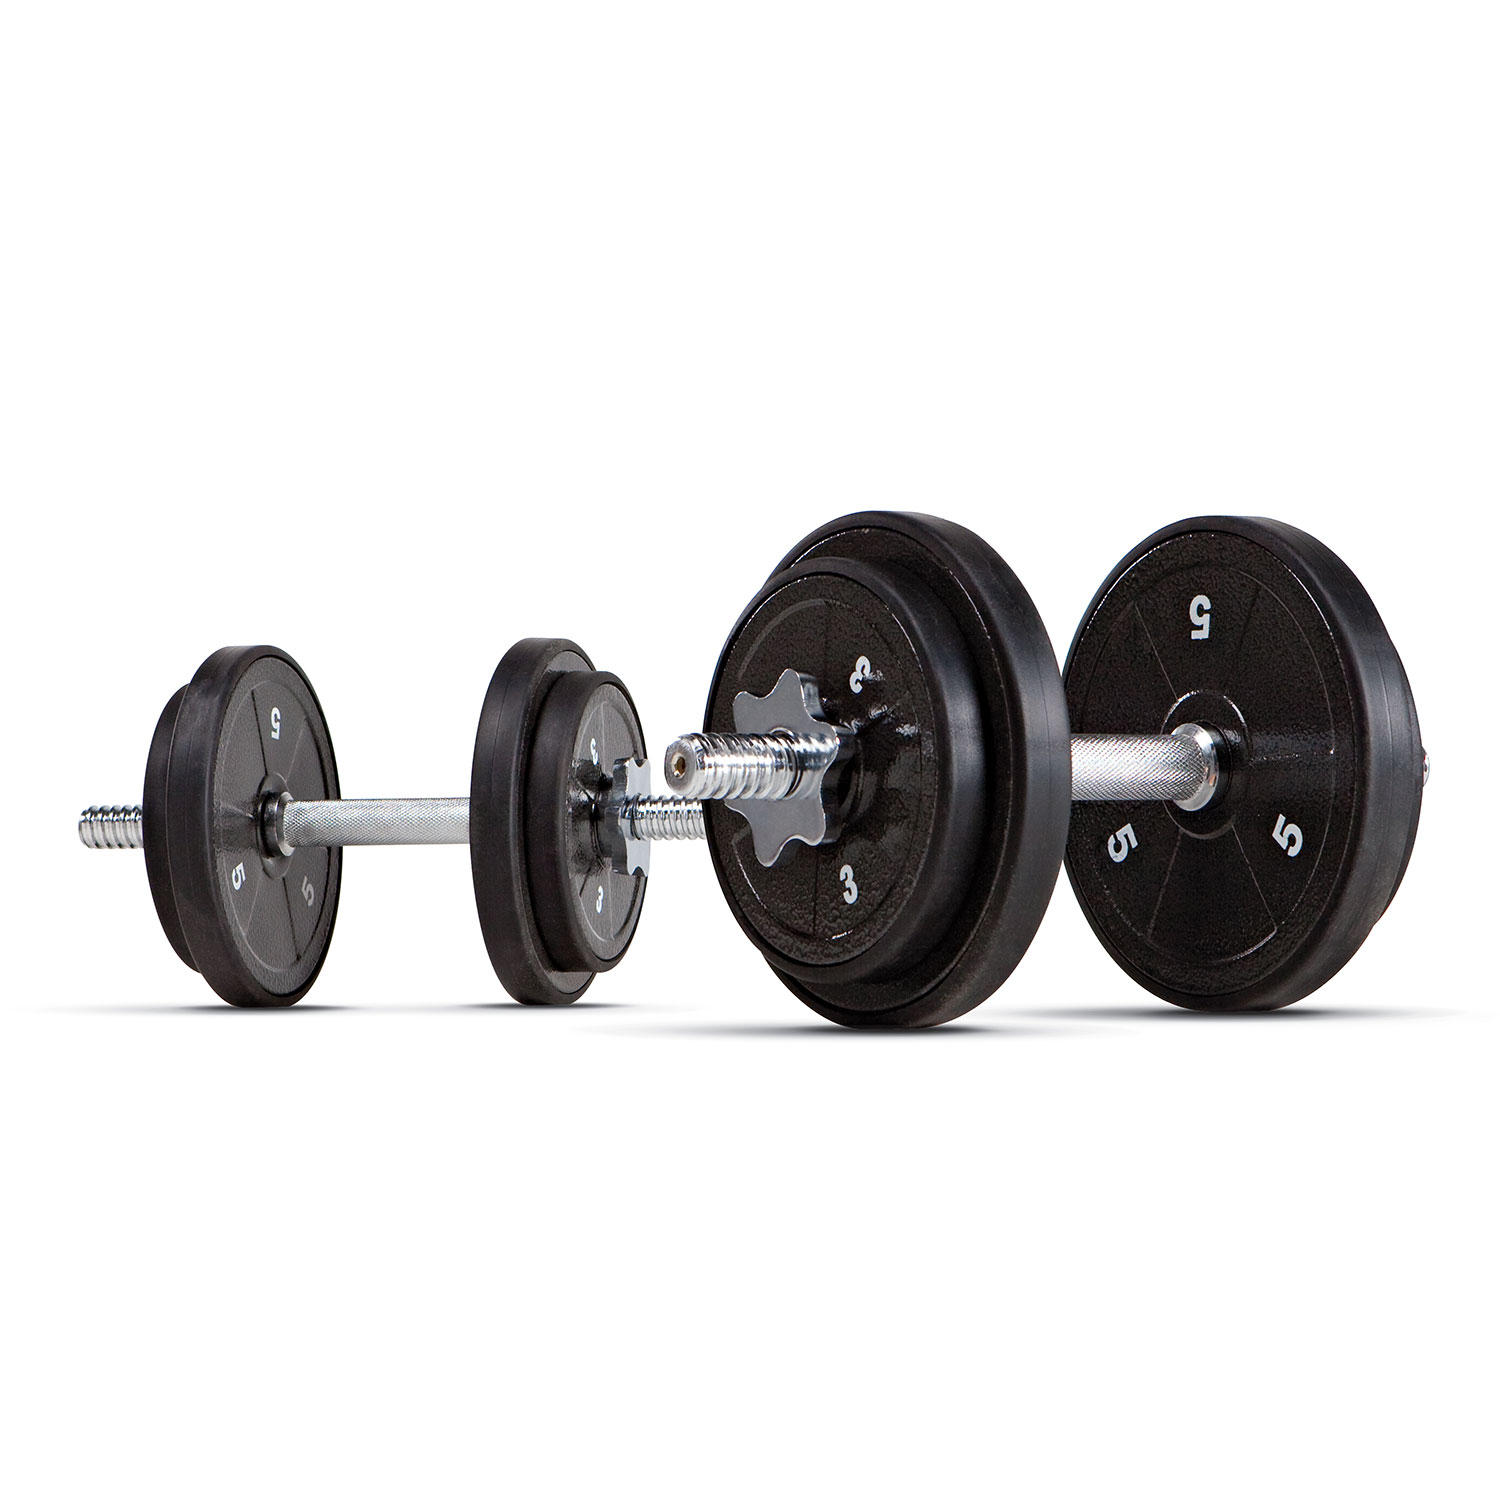 Marcy ADS-42 Dumbbell Set